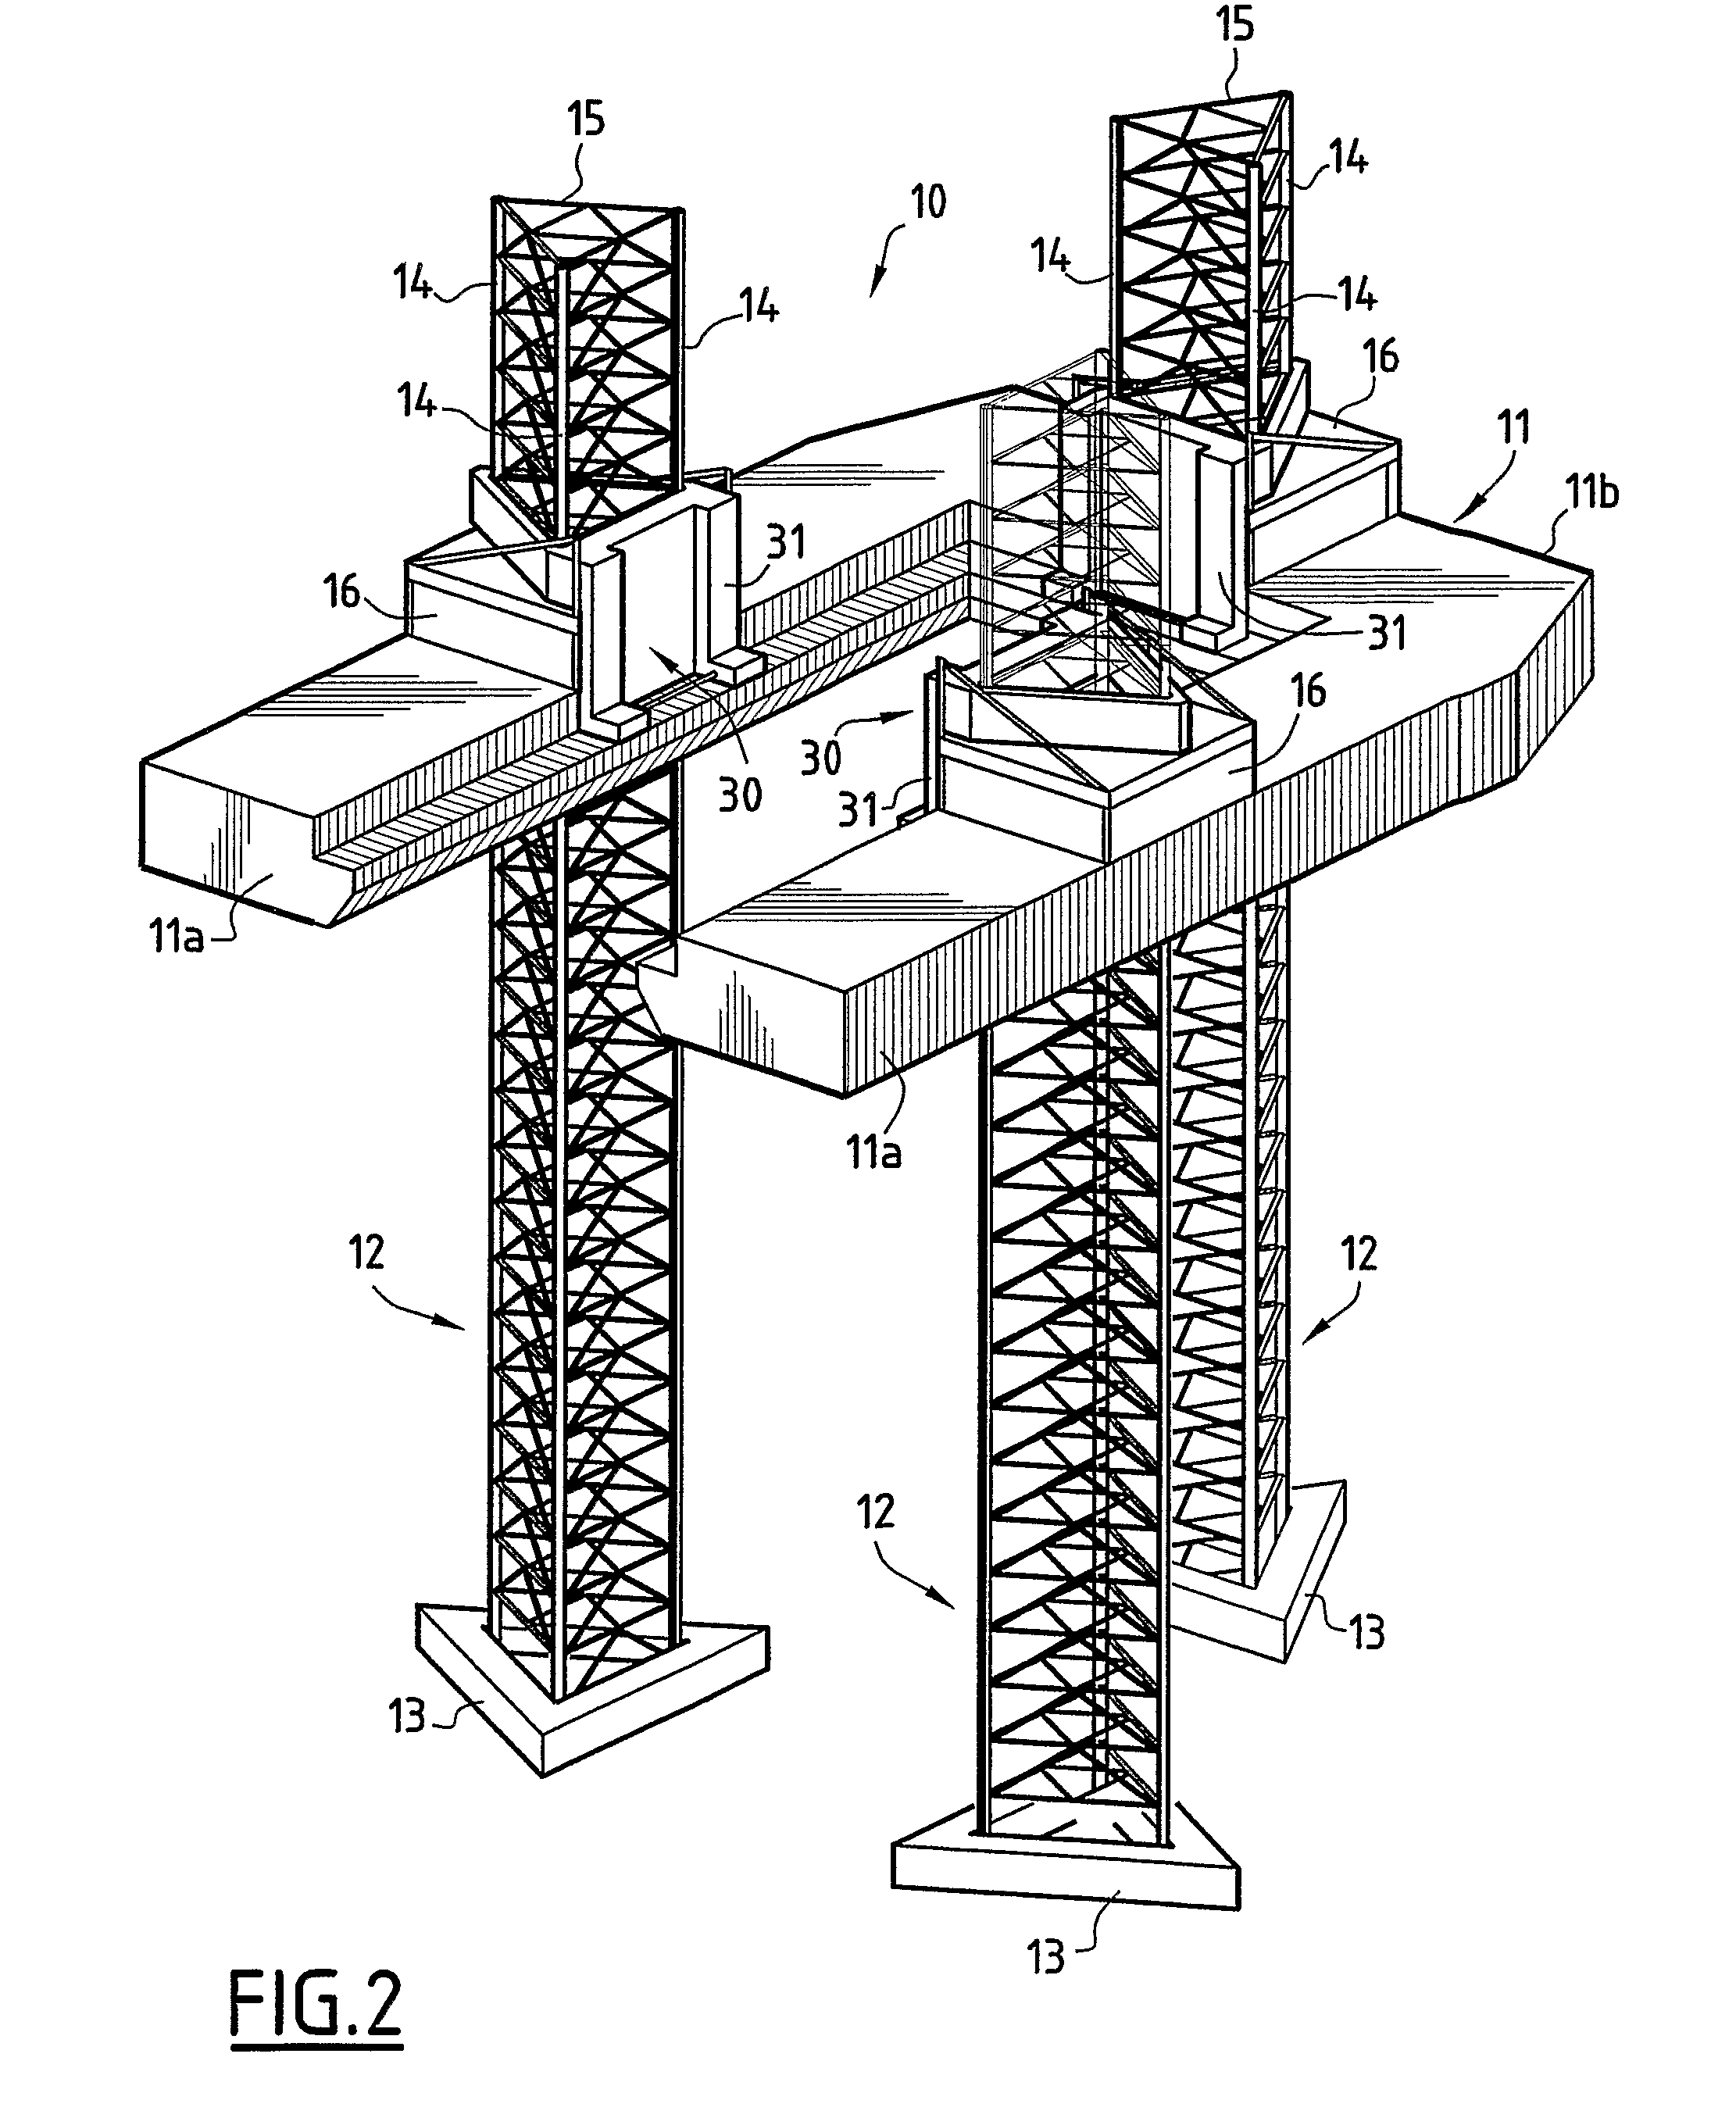 Structure for transporting, commissioning and decommissioning the elements of a fixed oil platform and methods for implementing such a structure